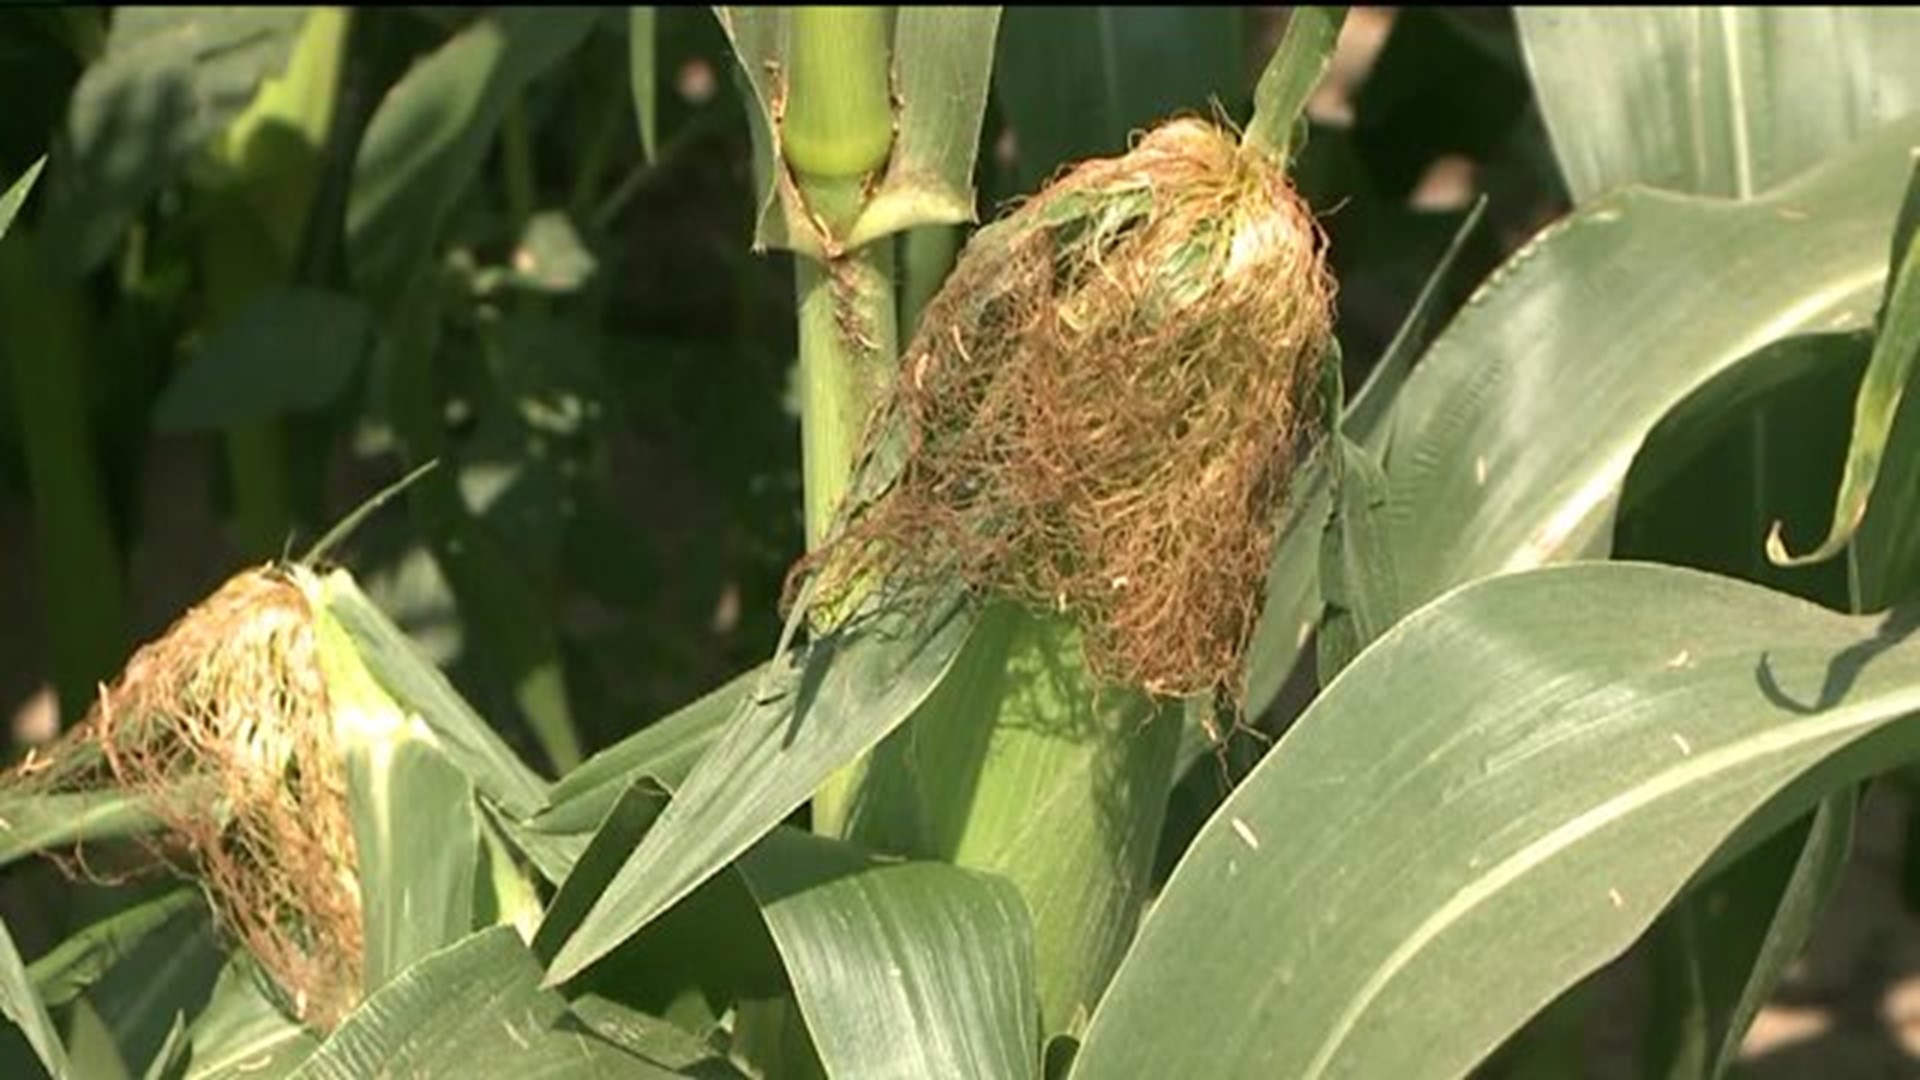 Farmer: Corn Destroyed by Vandals